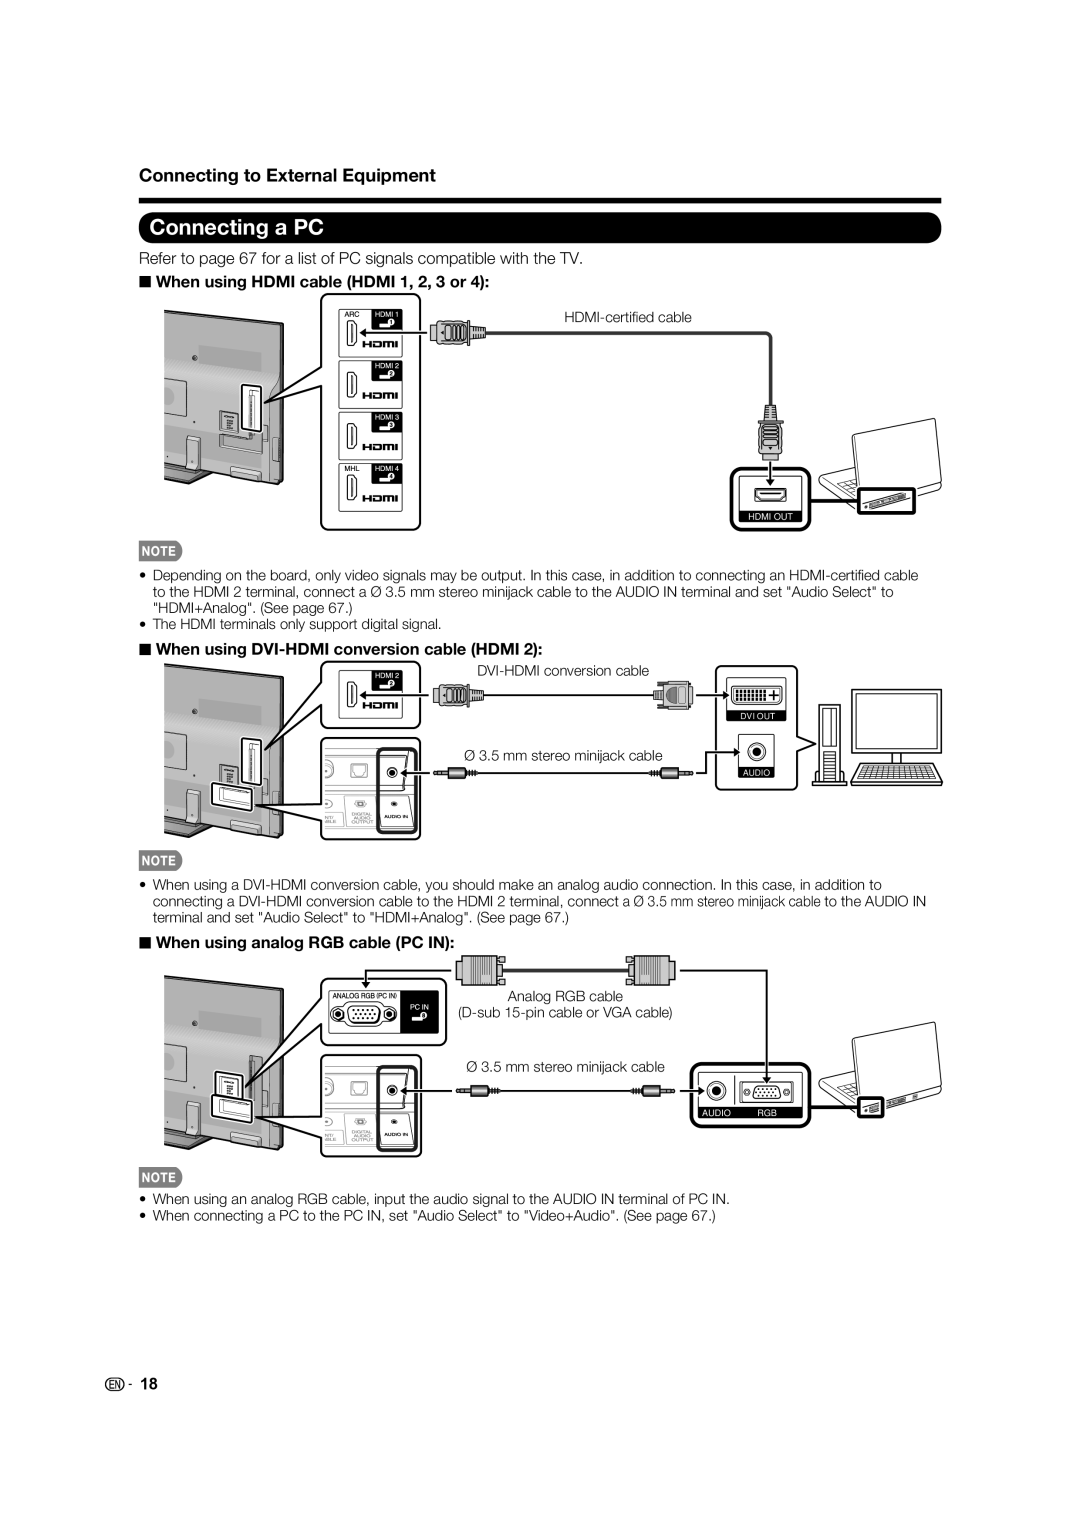 Sharp LC-70C7450U, LC-70C8470U, LC-60C7450U, LC-60C8470U operation manual Connecting to External Equipment, Audio Rgb 